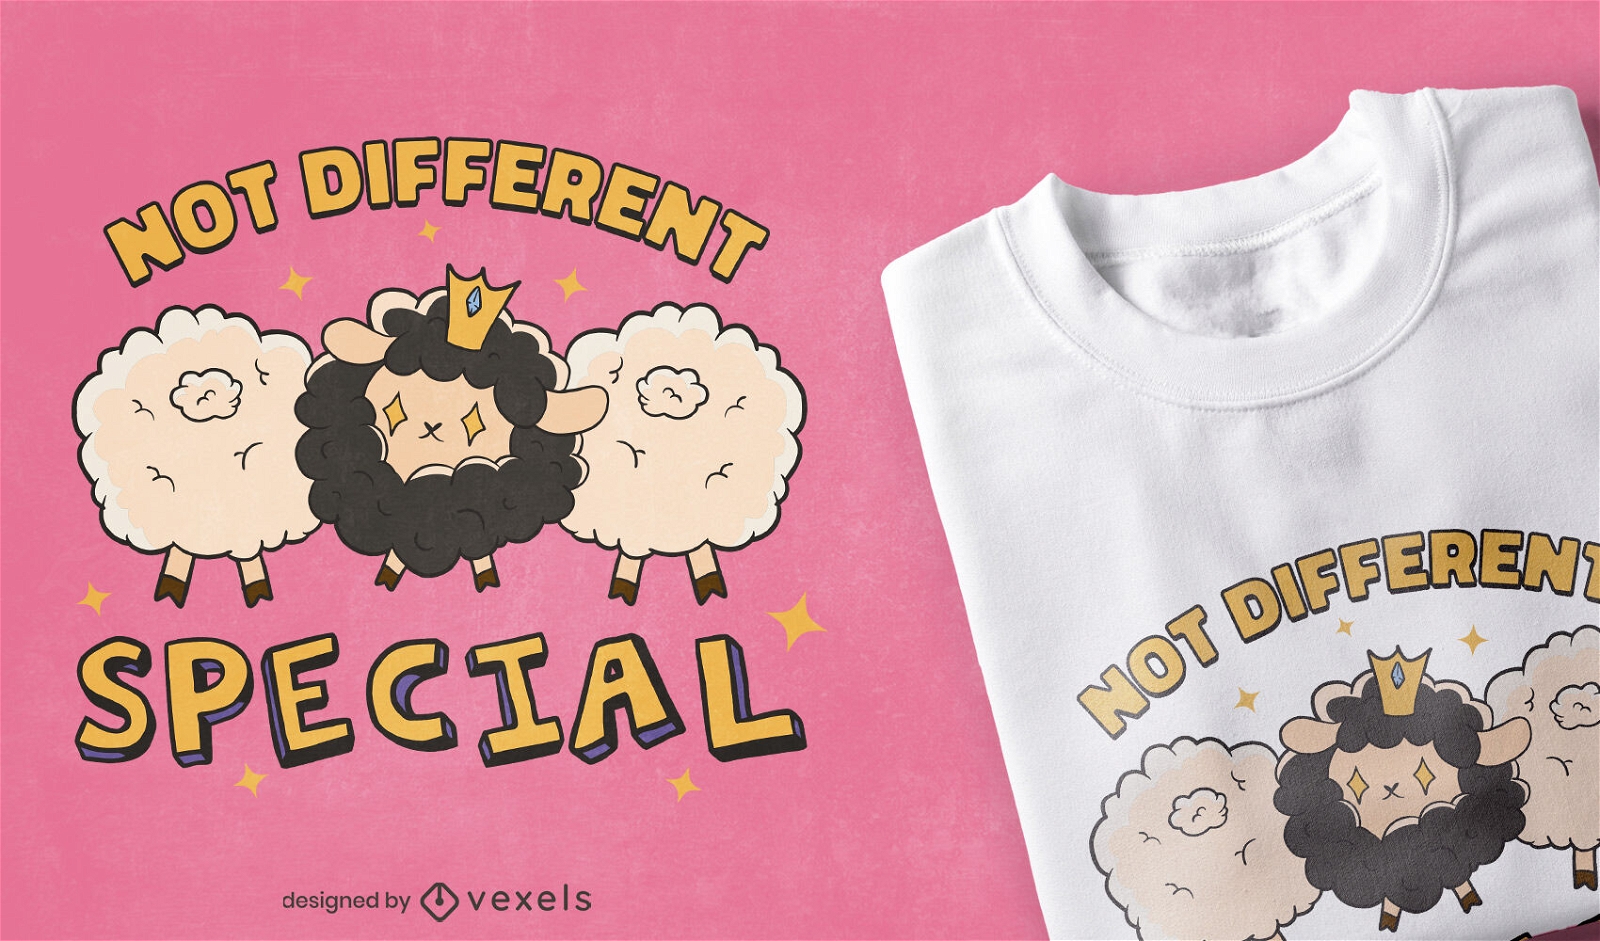 Not different special black sheep t-shirt design